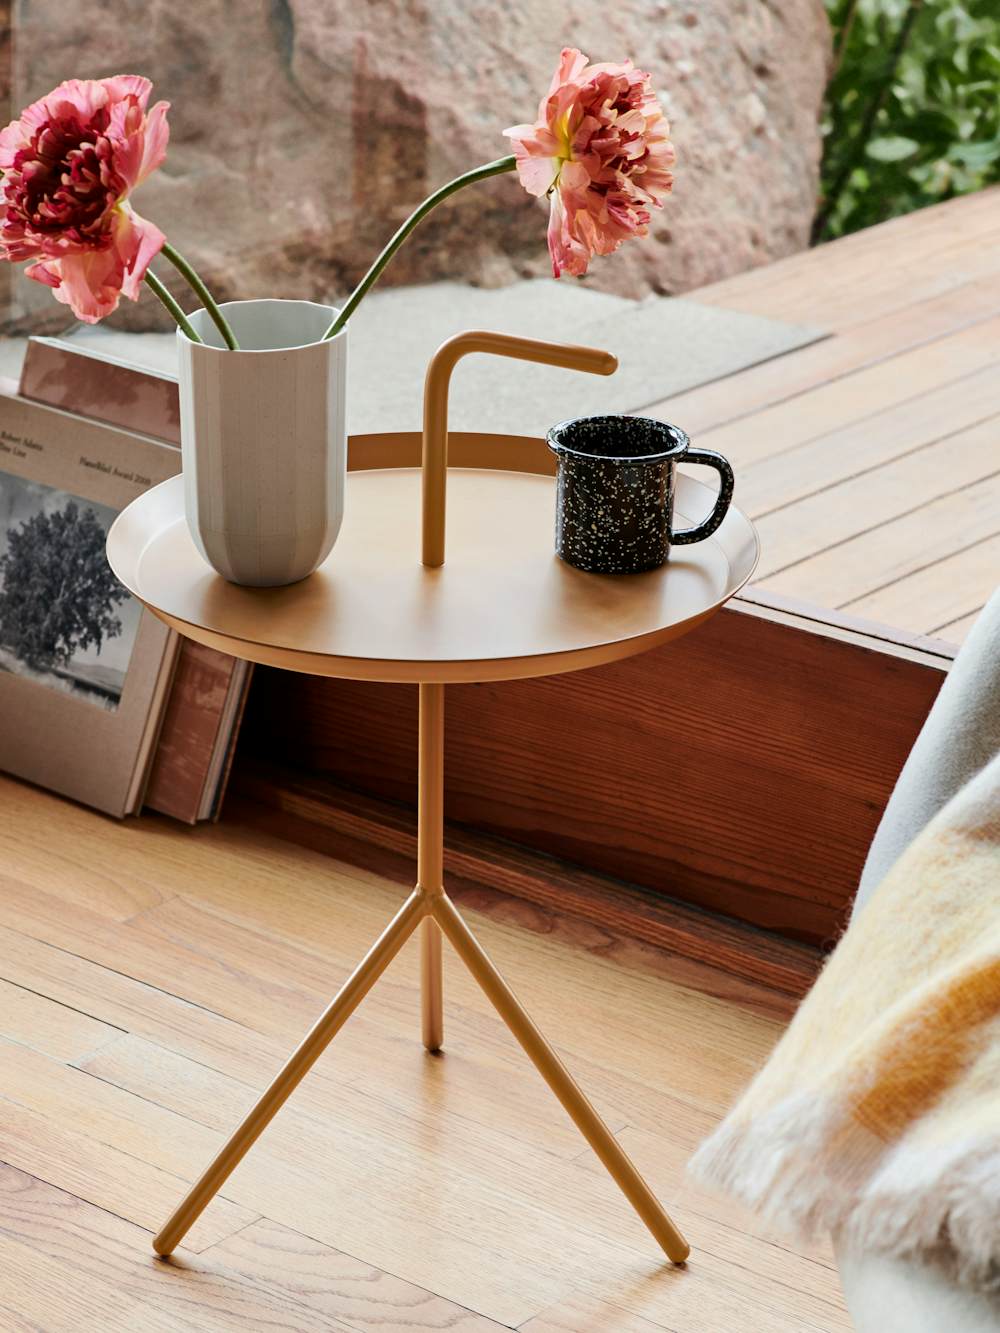 Enamel Coffee Cup sitting on a Don't Leave Me Side Table.